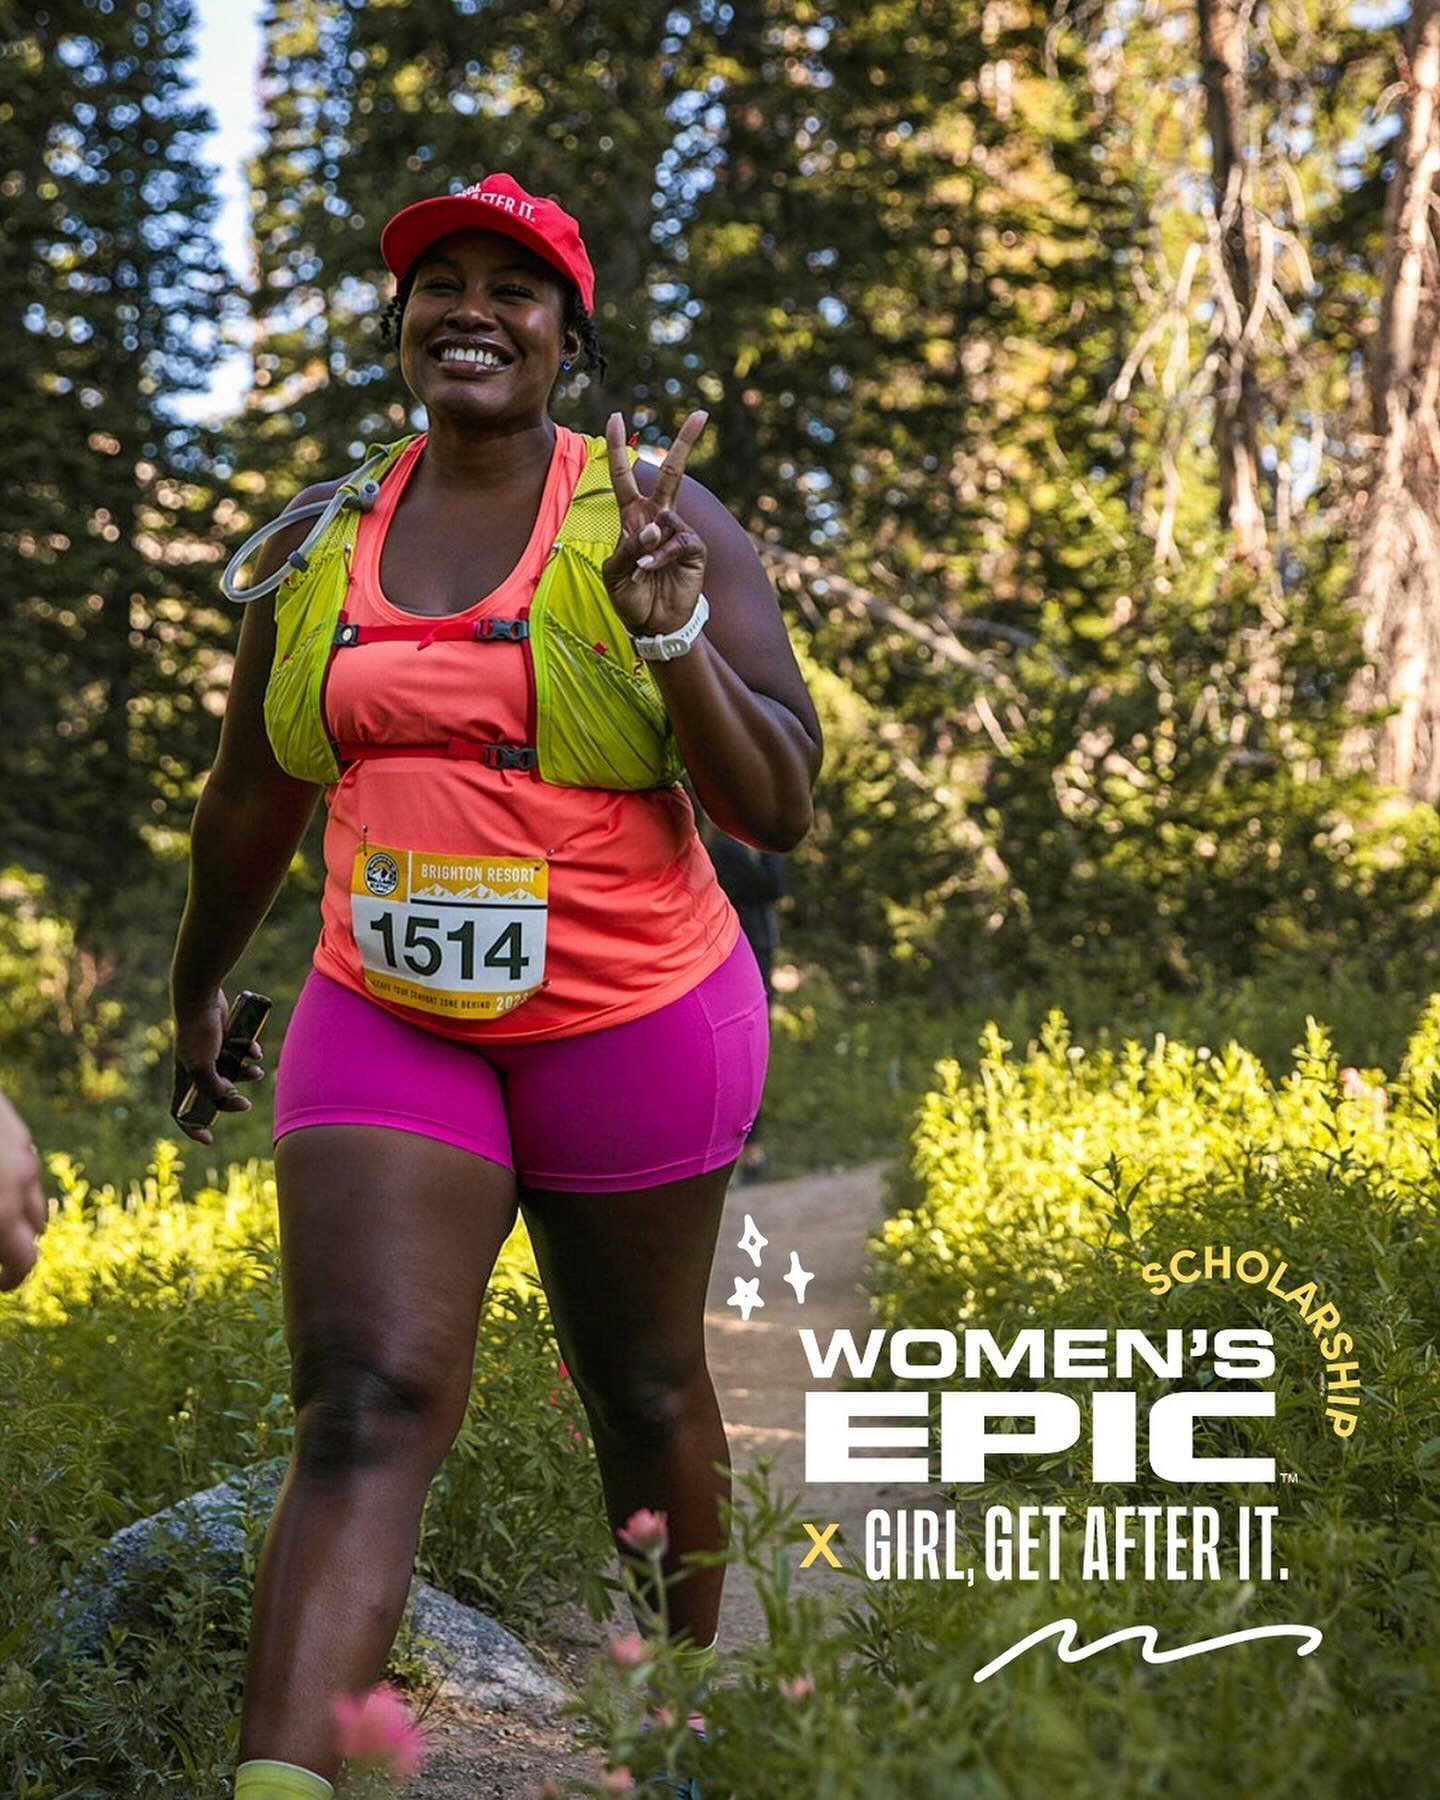 Want to be a #GGAI Athlete at this summer&rsquo;s @womens.epic? Scholarships are NOW open ⛰
⠀⠀⠀⠀⠀⠀⠀⠀⠀
To encourage more women to step into the world of trail running, we&rsquo;re sponsoring two runners for the Brighton race happening July 27th which 